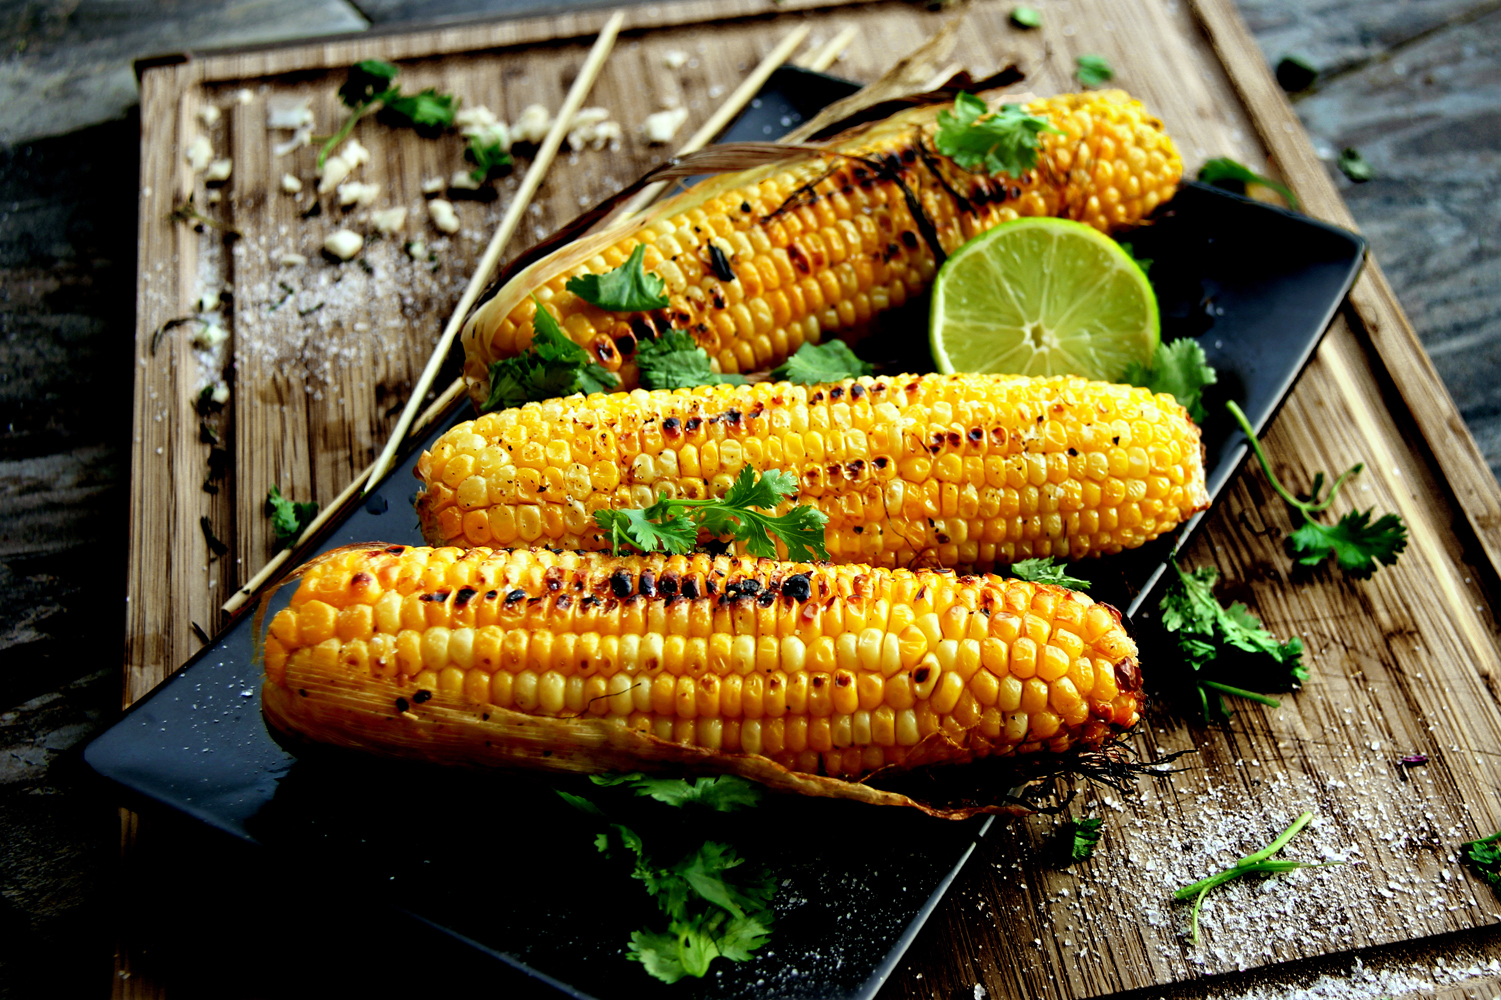 Settle These Food Debates and We’ll Guess Which Three Foods You Love the Most grilling corn